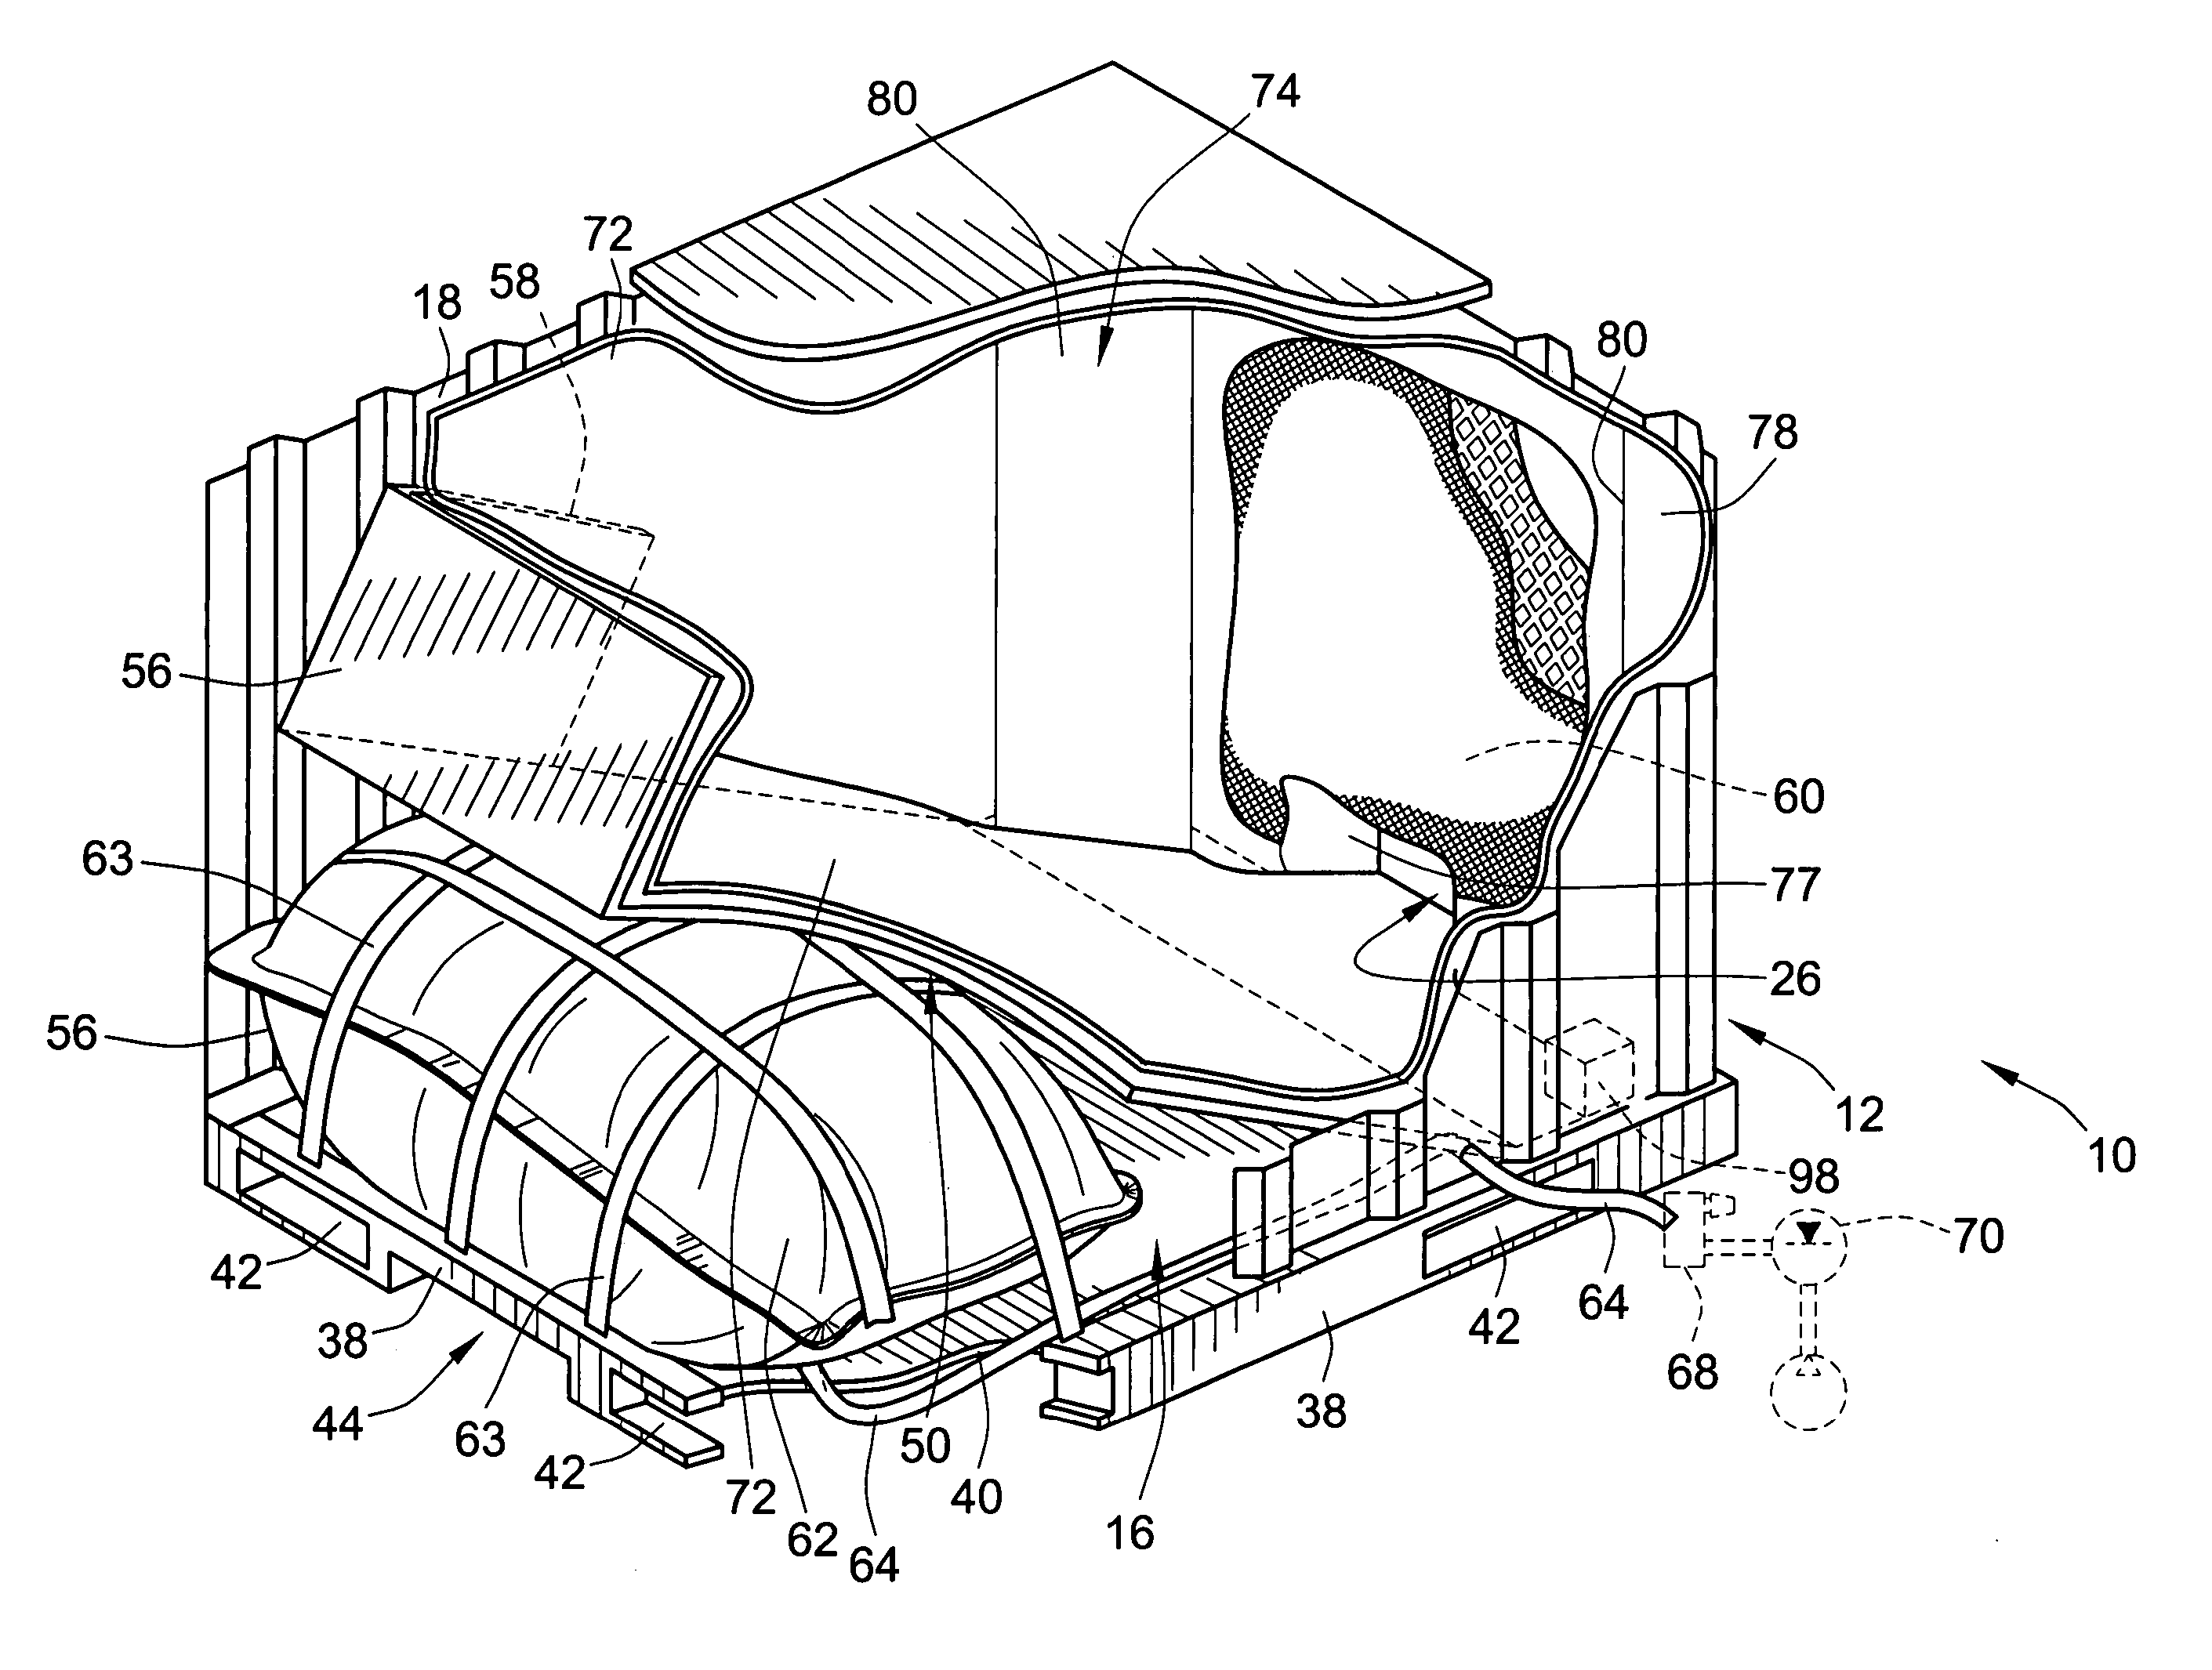 Apparatus for storing material